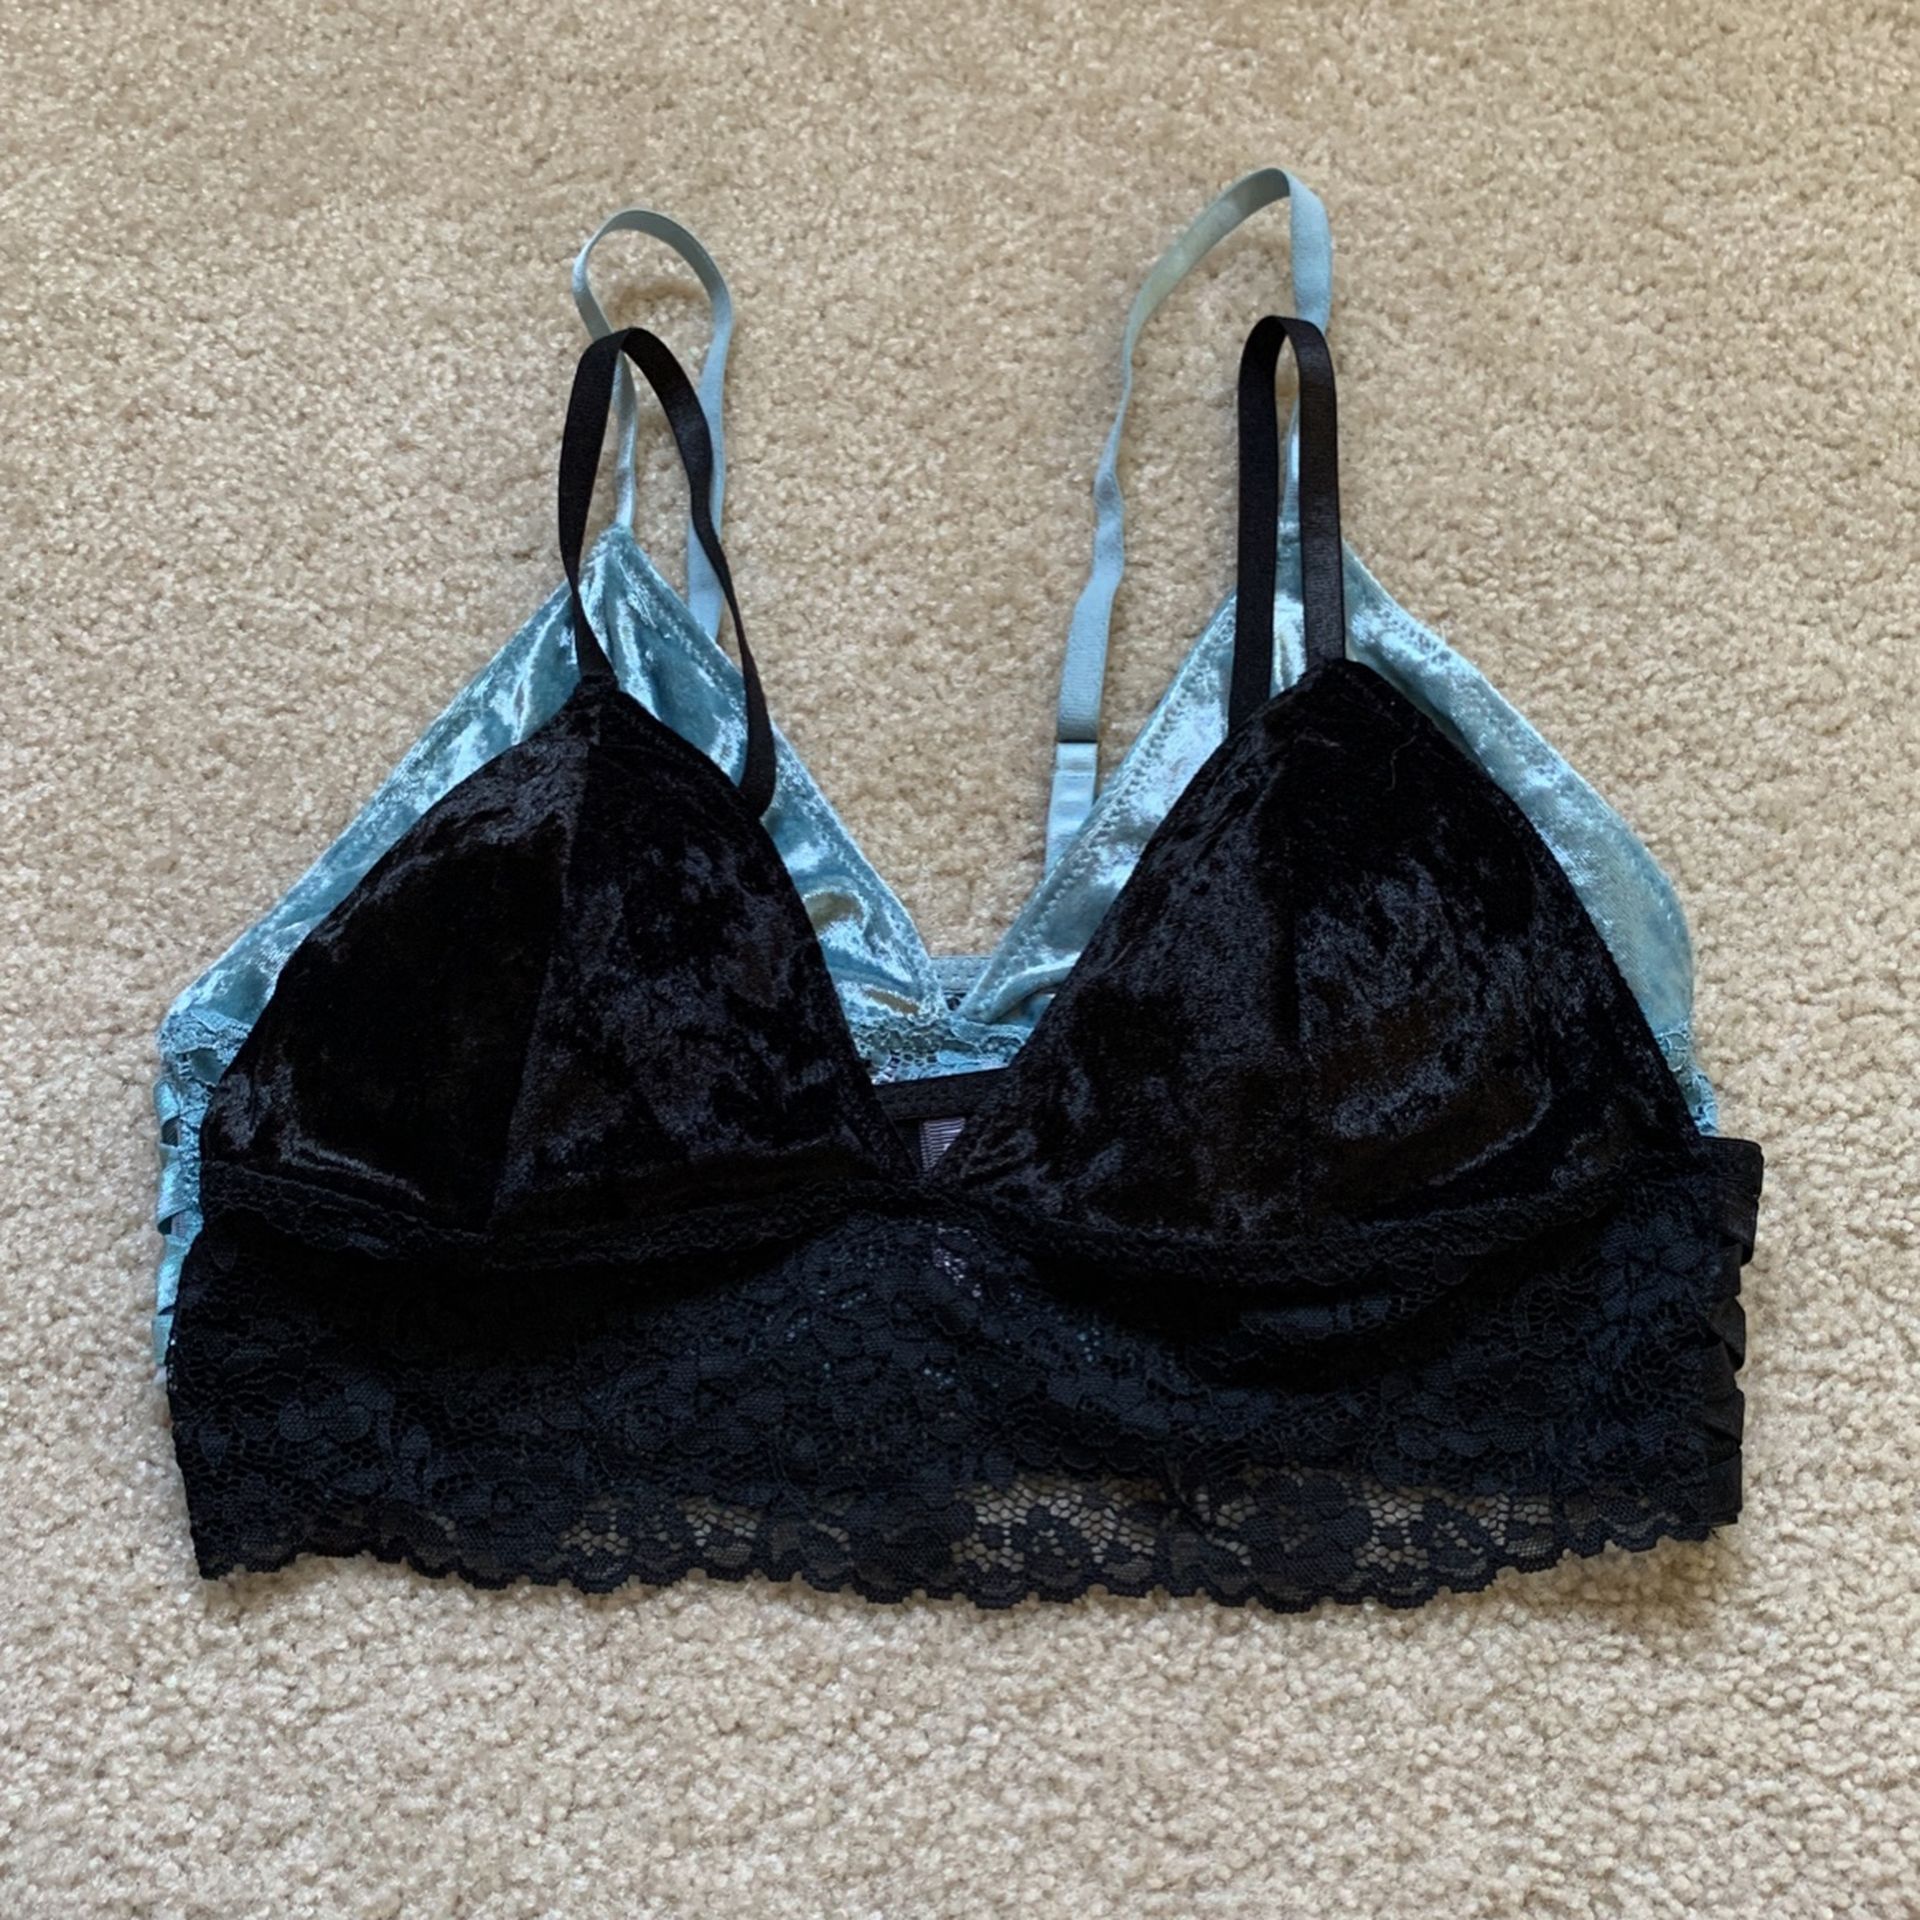 Identical Bralettes Black And Turquoise 